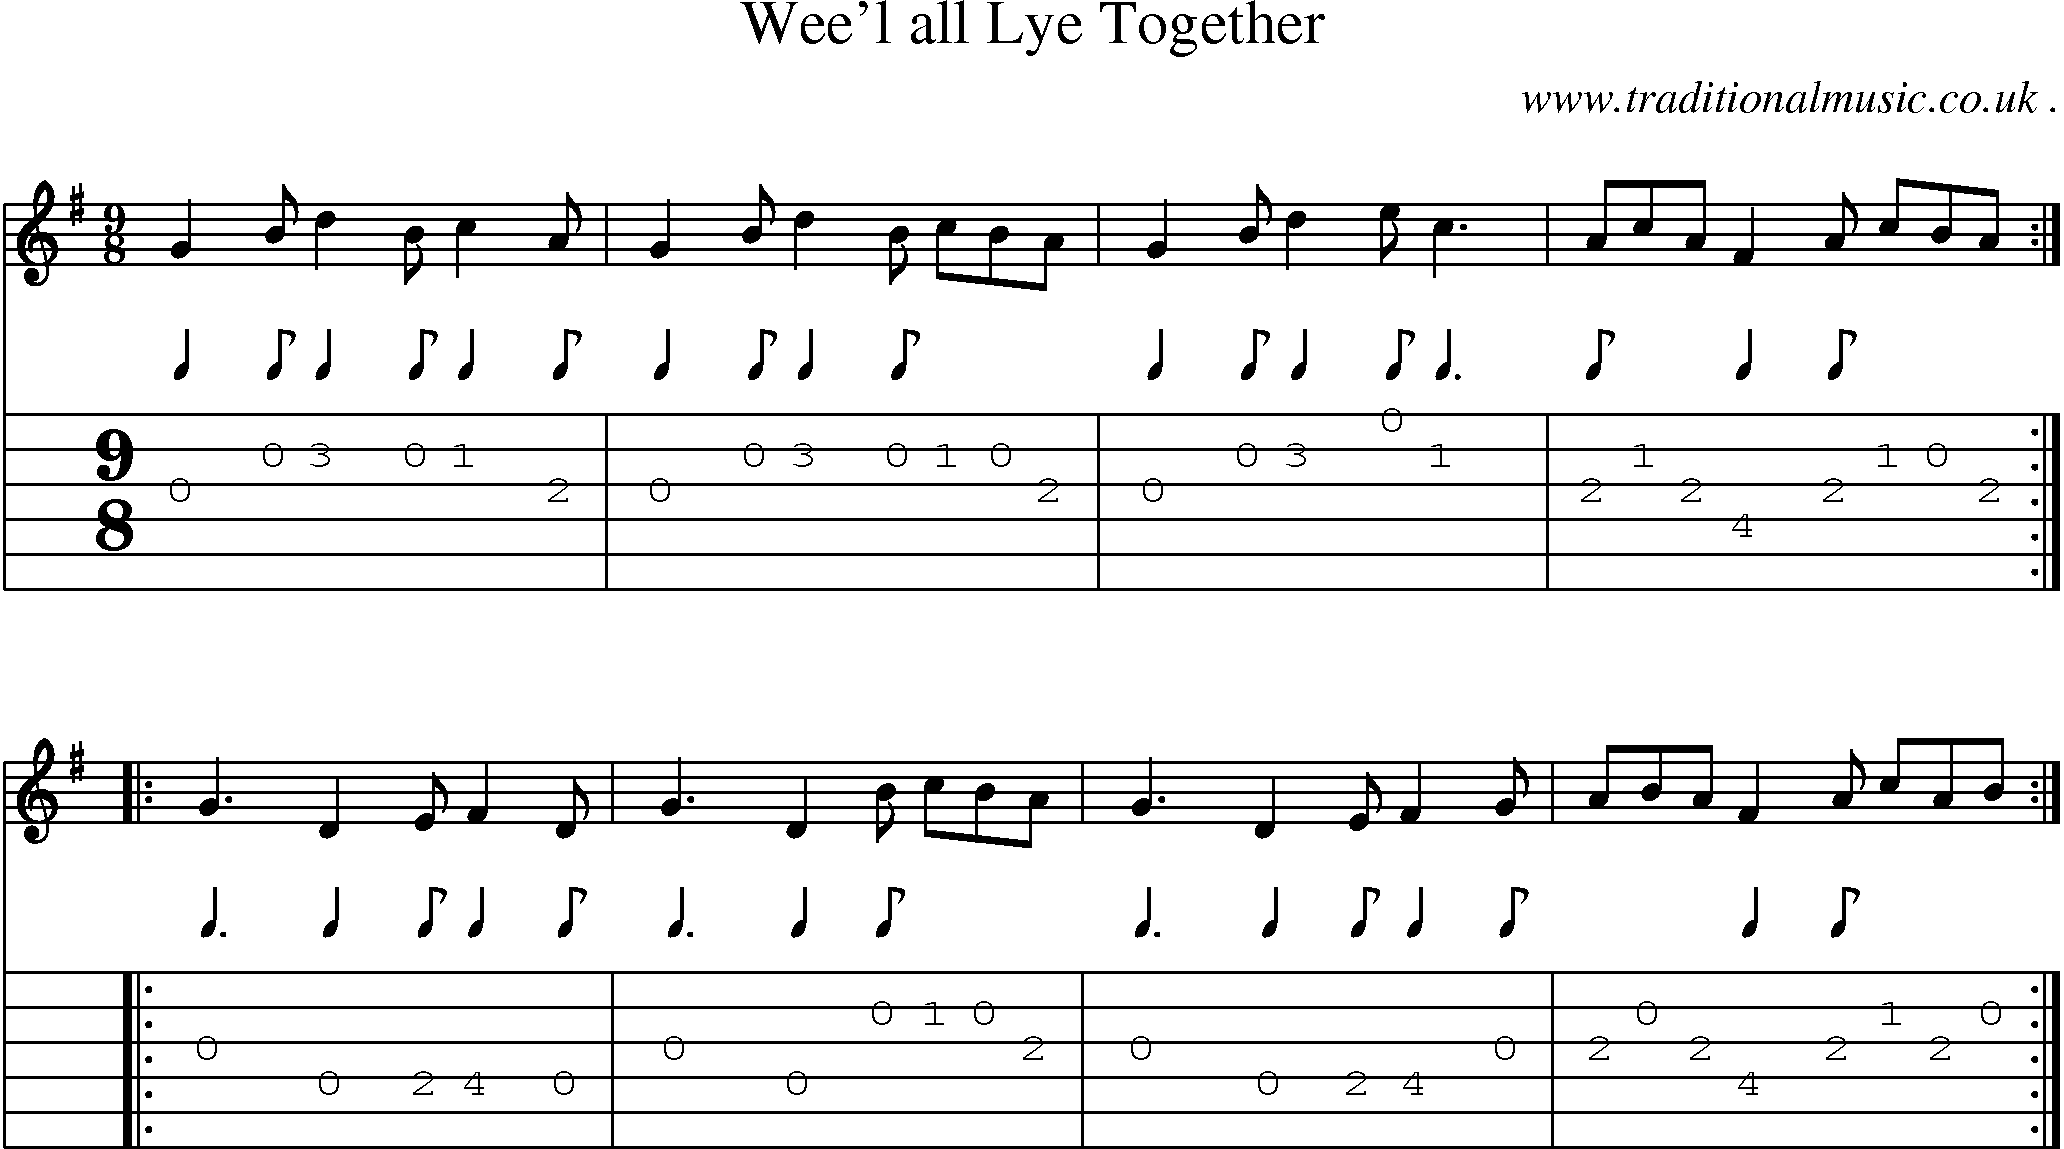 Sheet-Music and Guitar Tabs for Weel All Lye Together